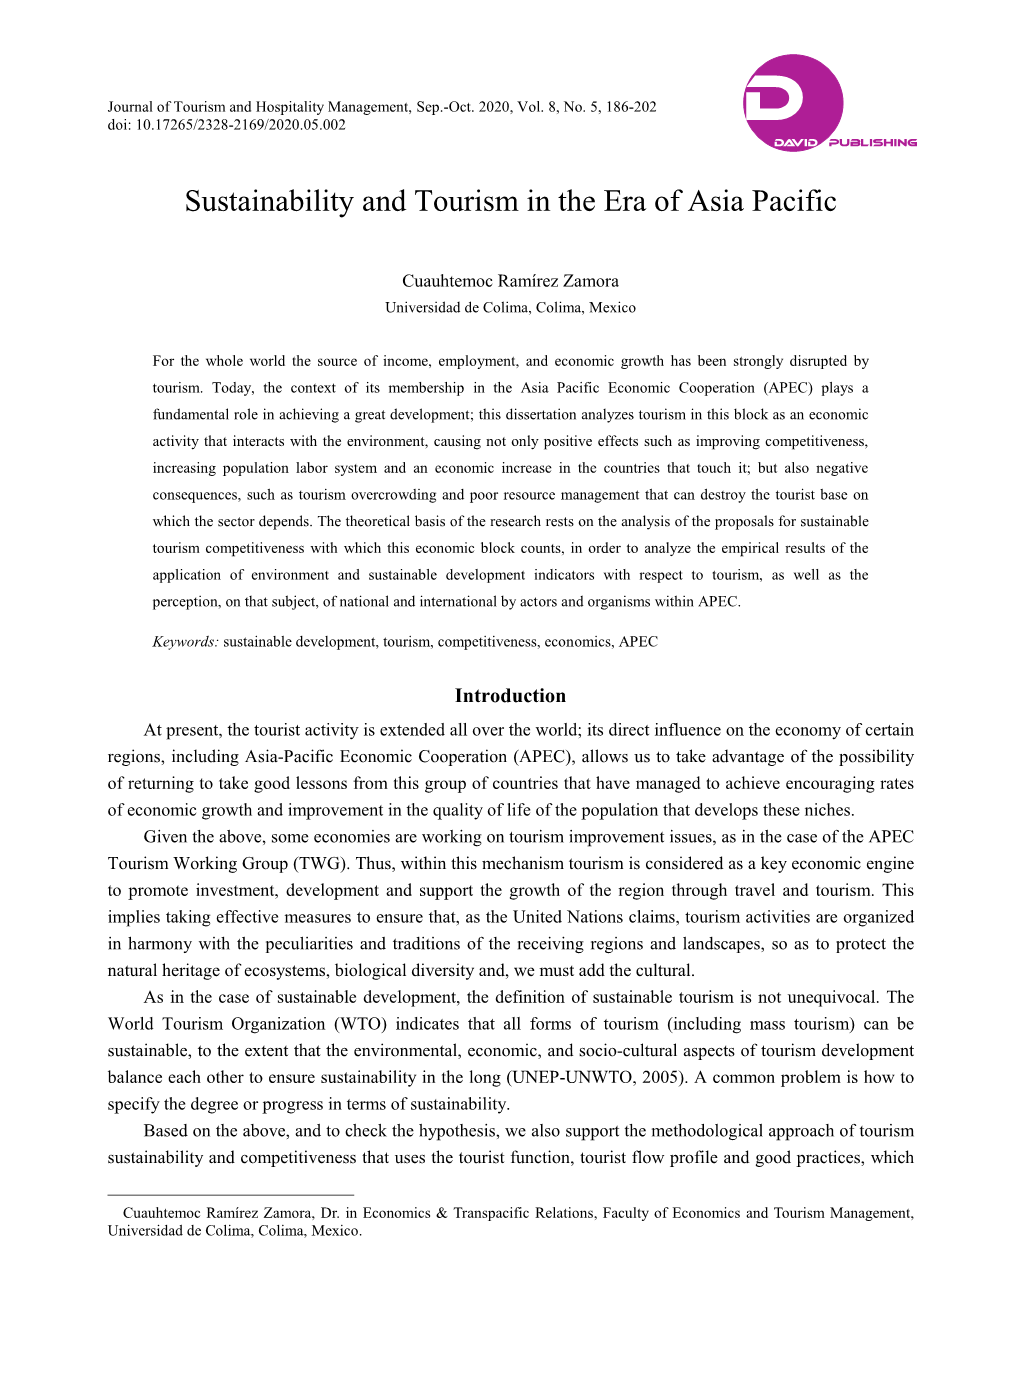 Sustainability and Tourism in the Era of Asia Pacific